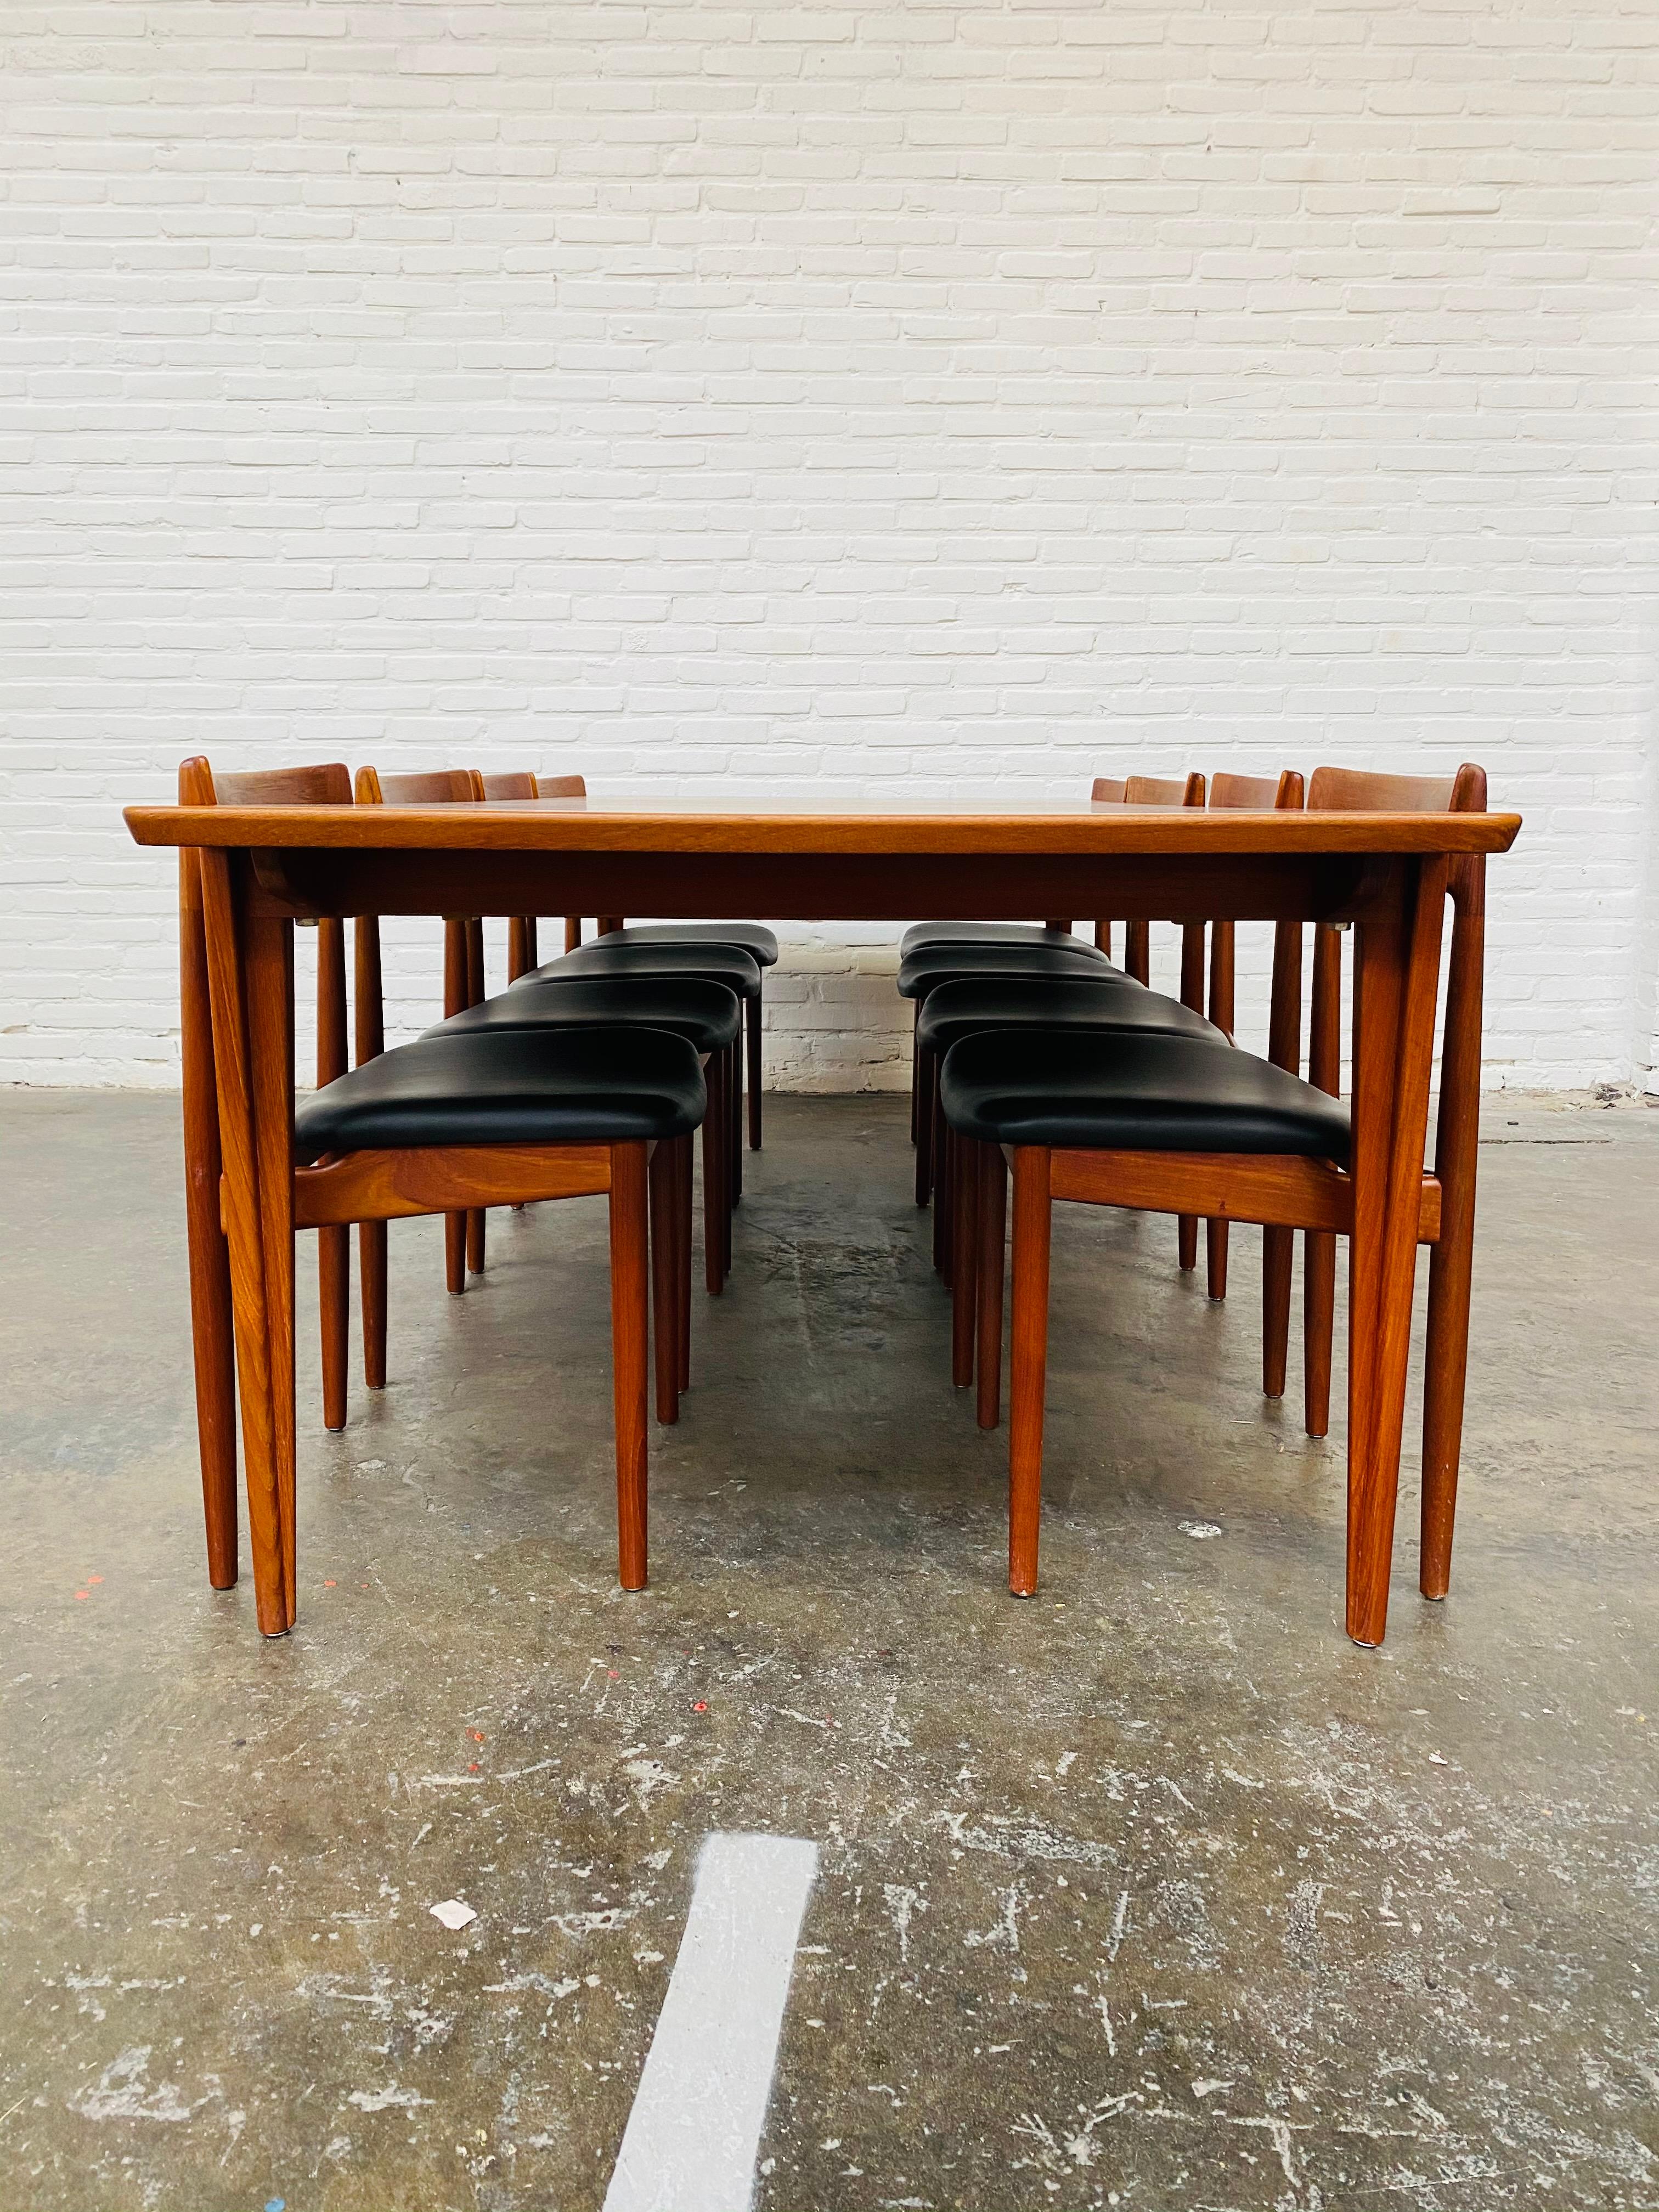 This extendable dining table and 8 chairs in teak are designed by Henry Rosengren Hansen in the sixties. The set is manufactured by Brande Mobelfabrik in Denmark. The set excels in extraordinary craftmanship and exceptional details. All eight chairs